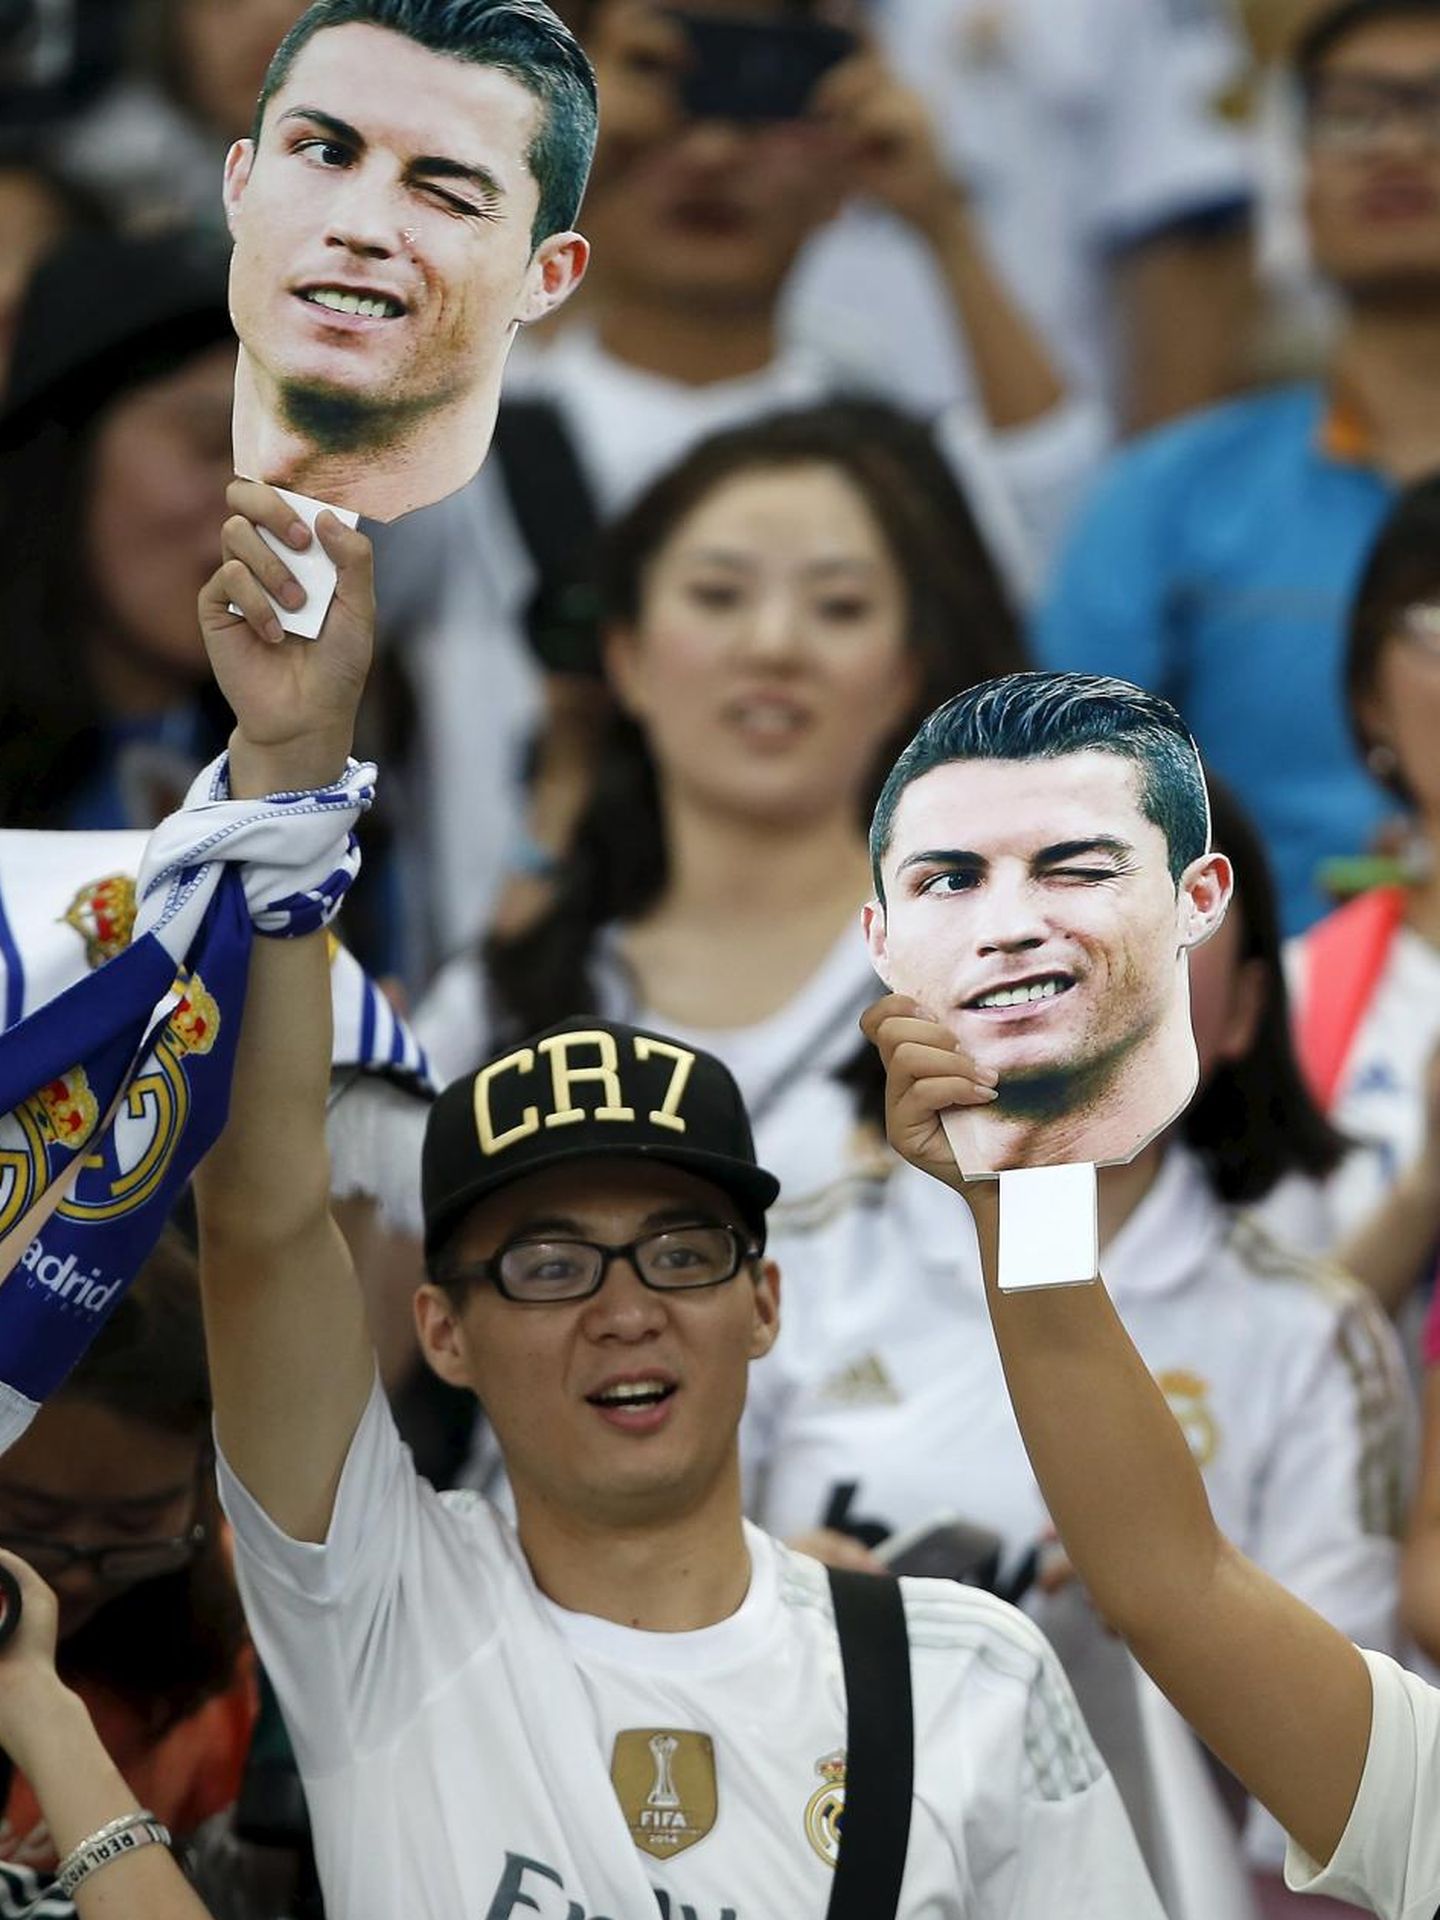 Fans of Real Madrid reacts during a training session ahead of a friendly match against A.C. Milan in Shanghai